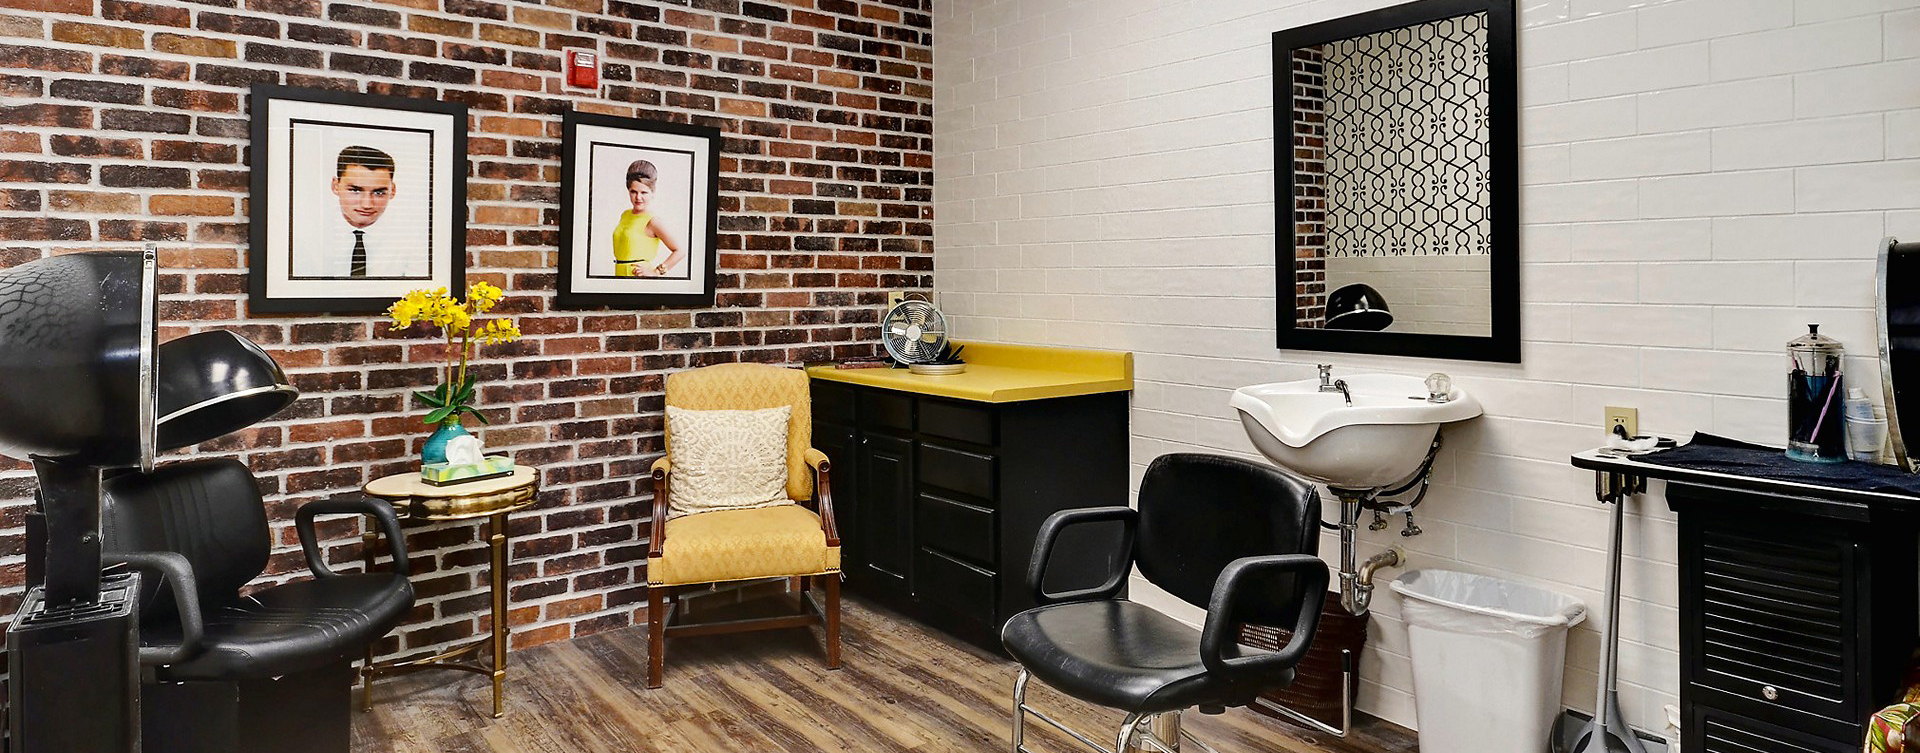 Strut on in and find out what the buzz is all about in the salon at Bickford of Crystal Lake